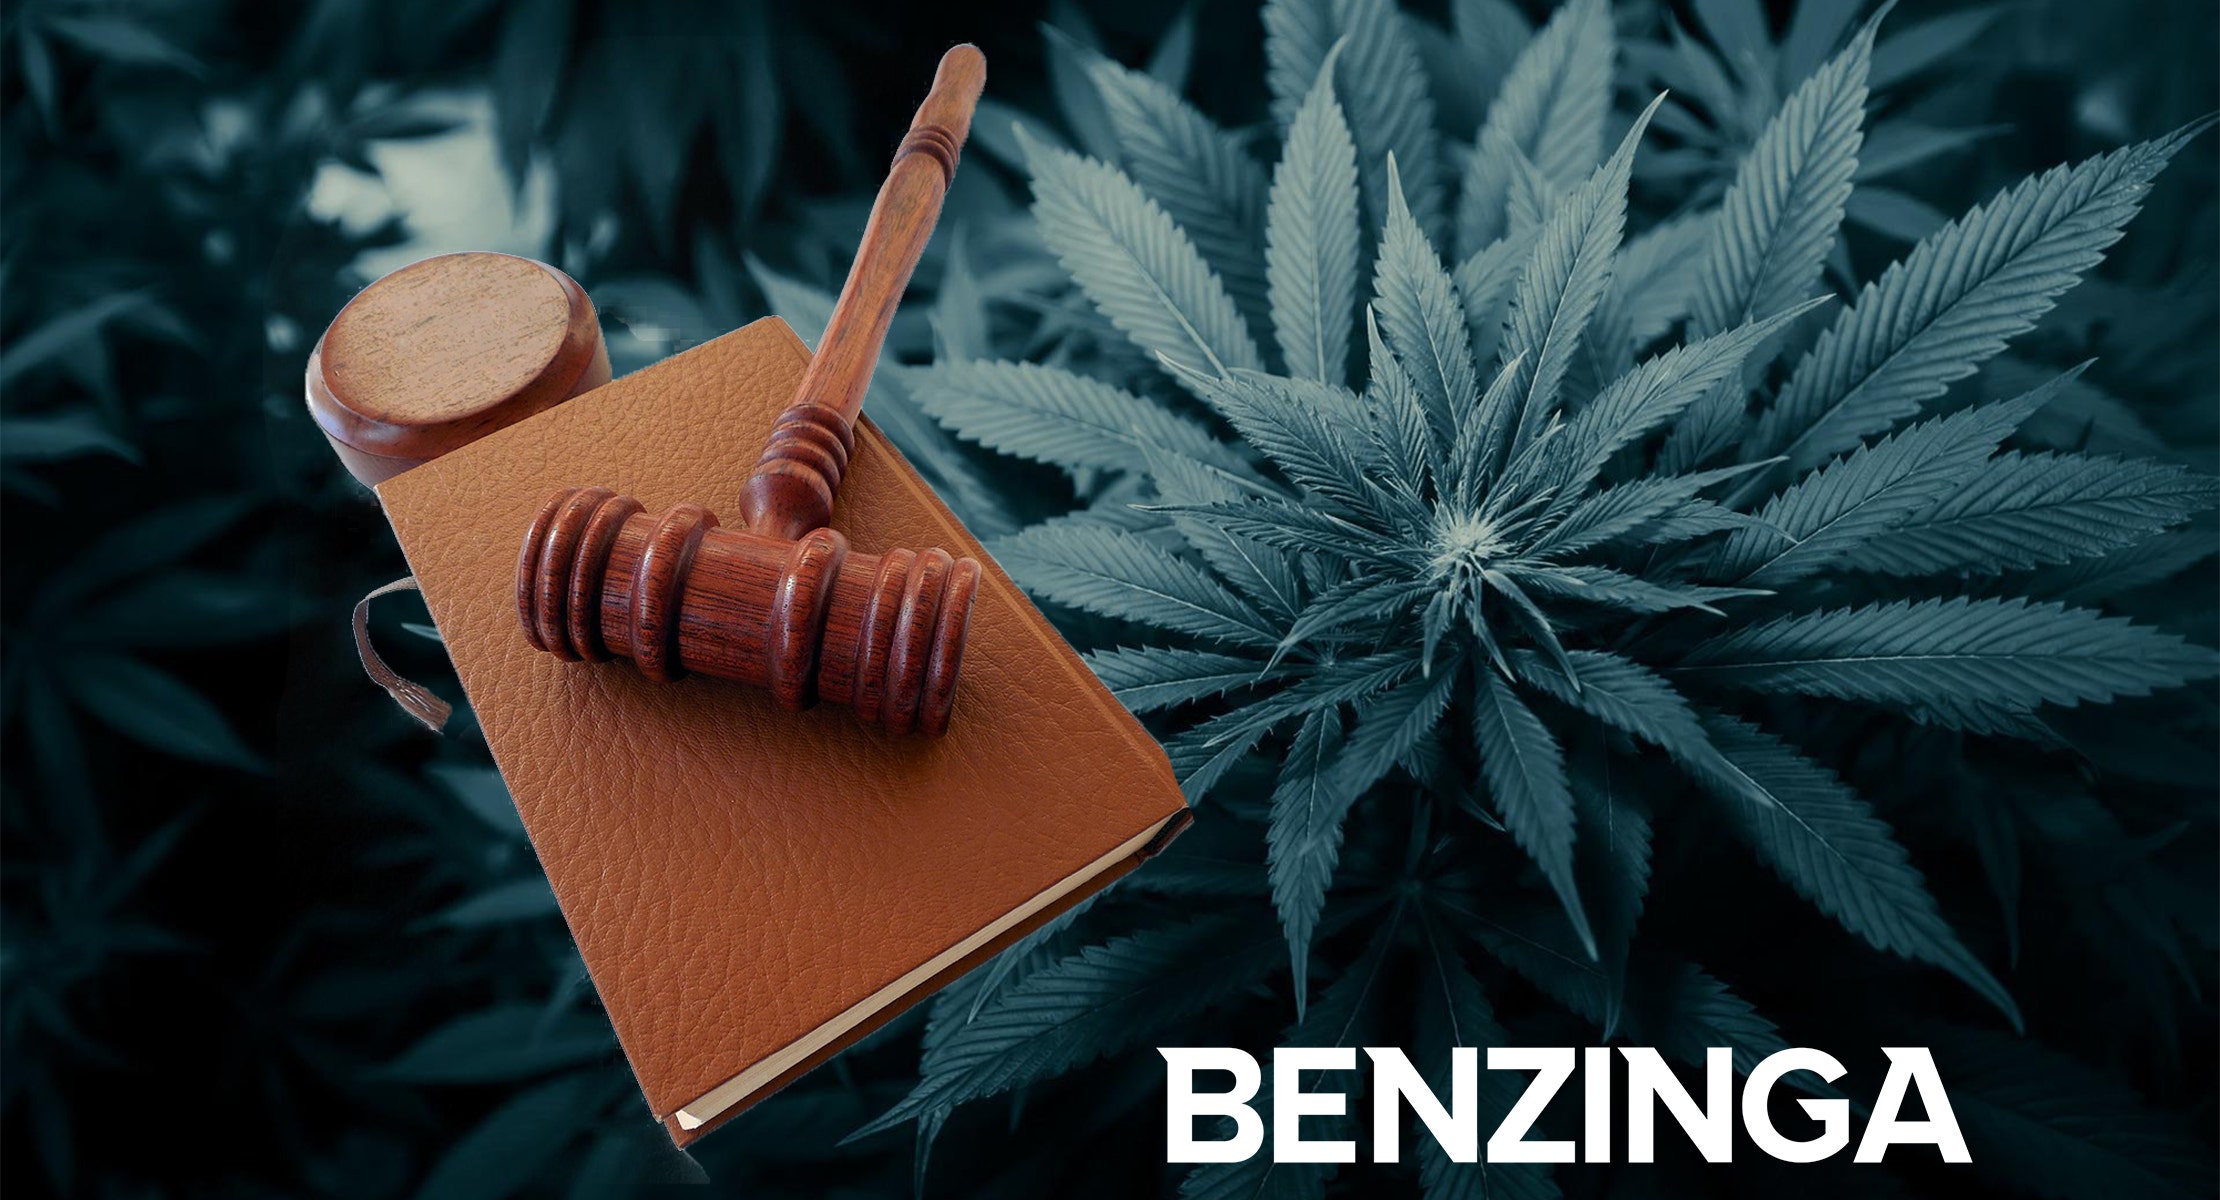 Federal Court Ruling Paves Way For Cannabis Interstate Commerce; Costa Rica Plans To Legalize Marijuana & More Industry News